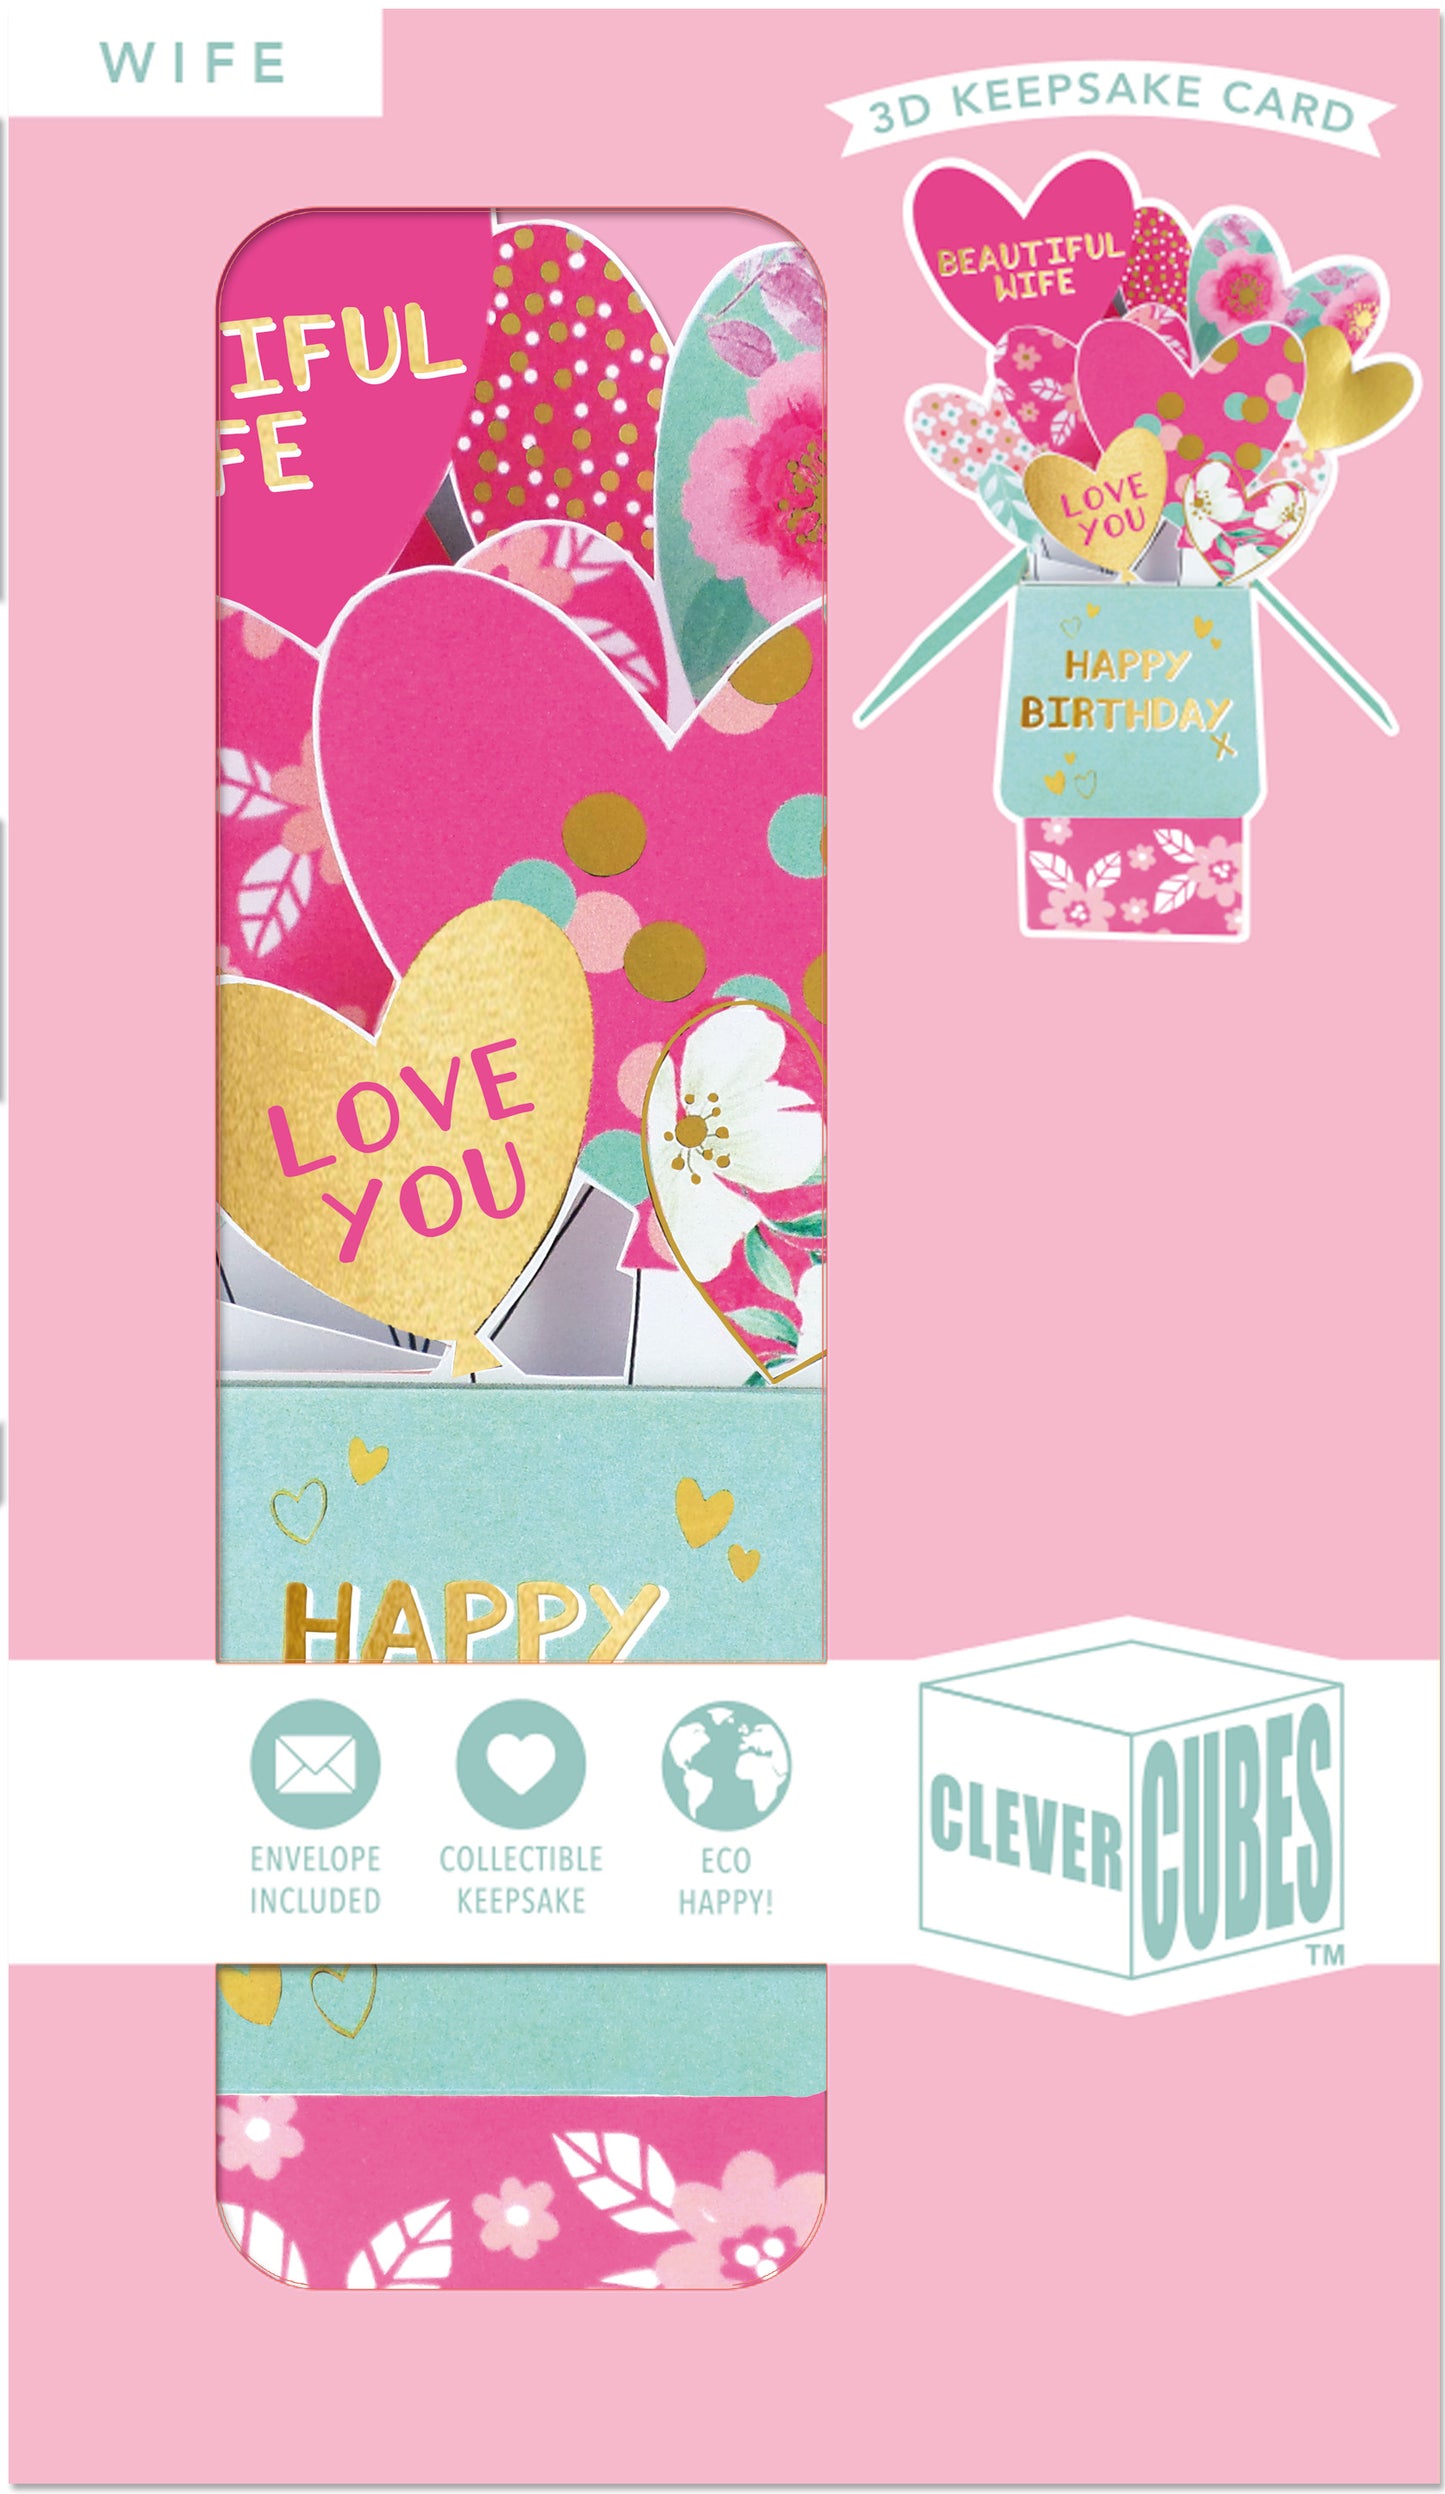 Clever Cube Beautiful Wife Love Pops! Birthday Pop Up Greeting Card